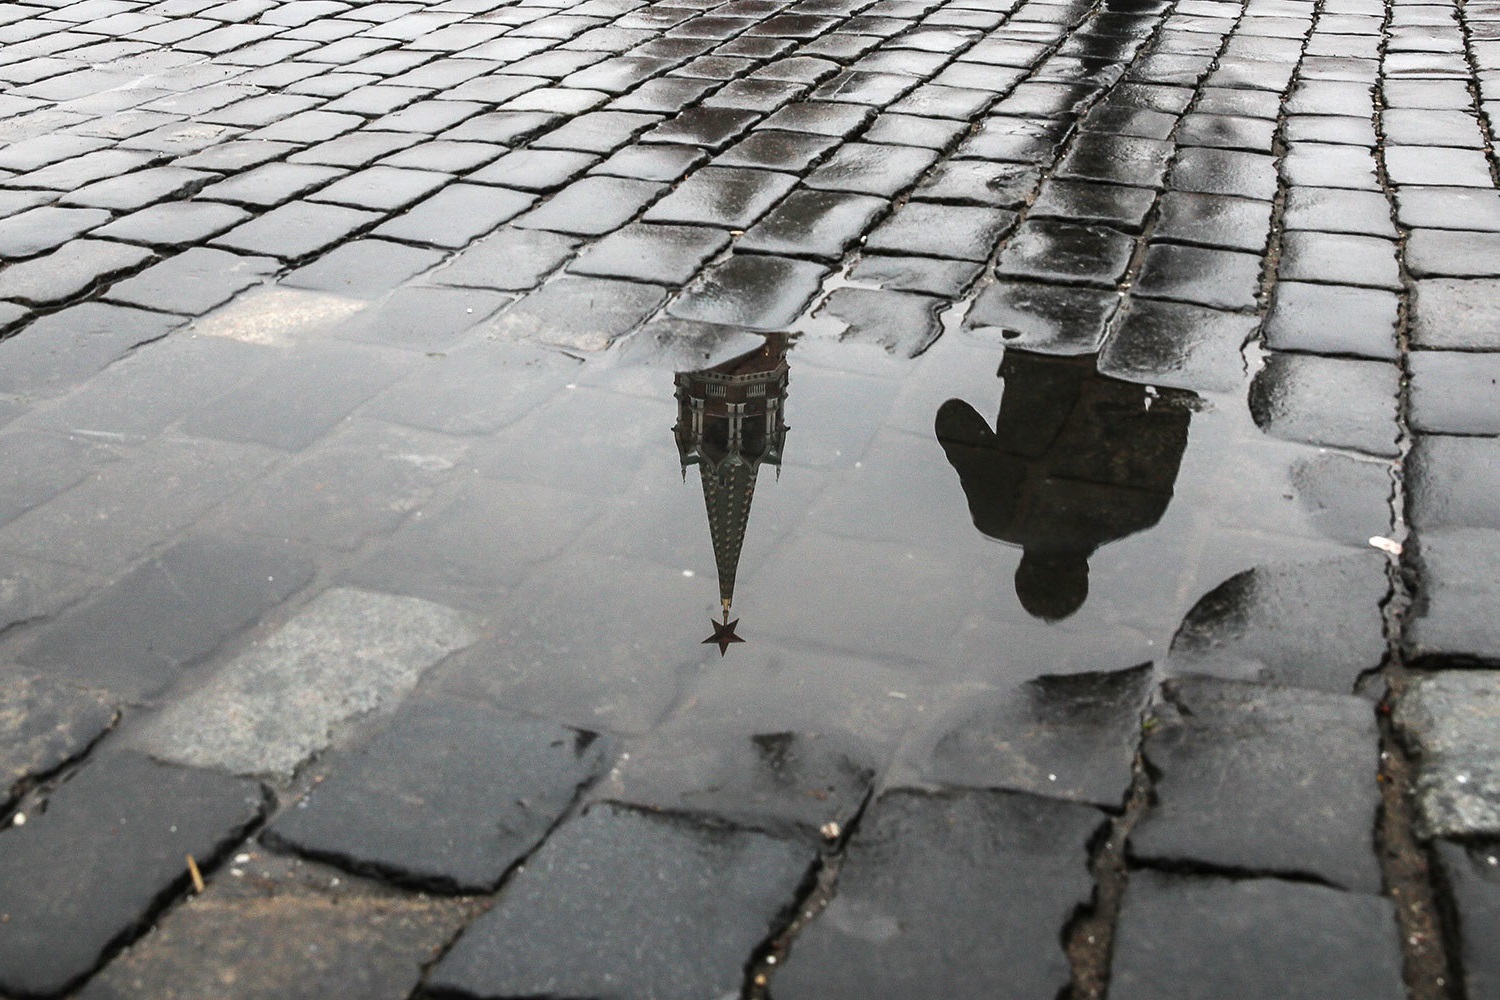 The Kremlin in a puddle, Moscow, Russia (Image: D. Abramov / vedomosti.ru)